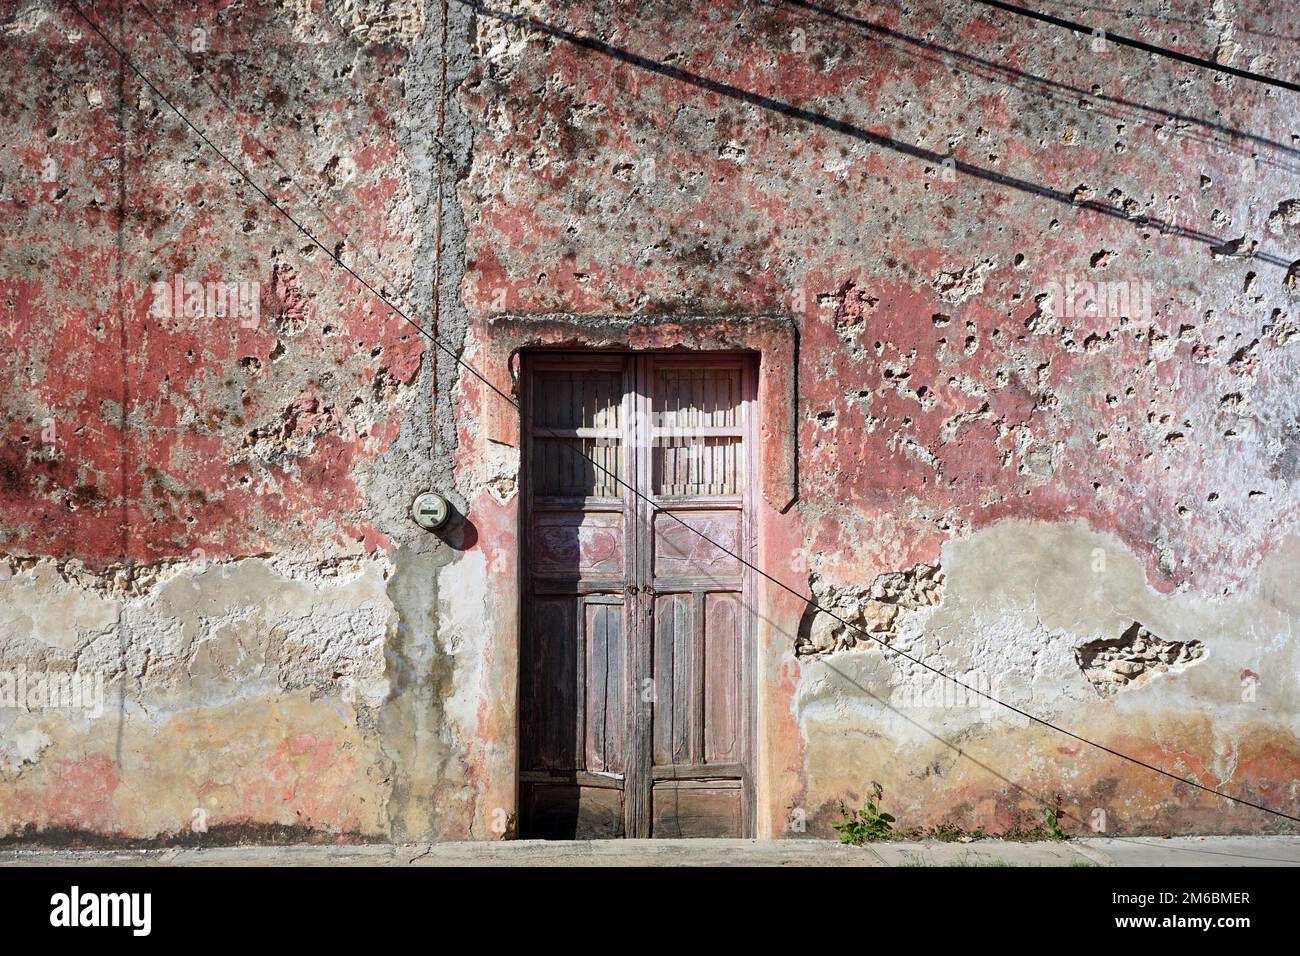 Old wooden door and crumbling pink stone wall in Valladolid, Yucatan, Mexico Stock Photo